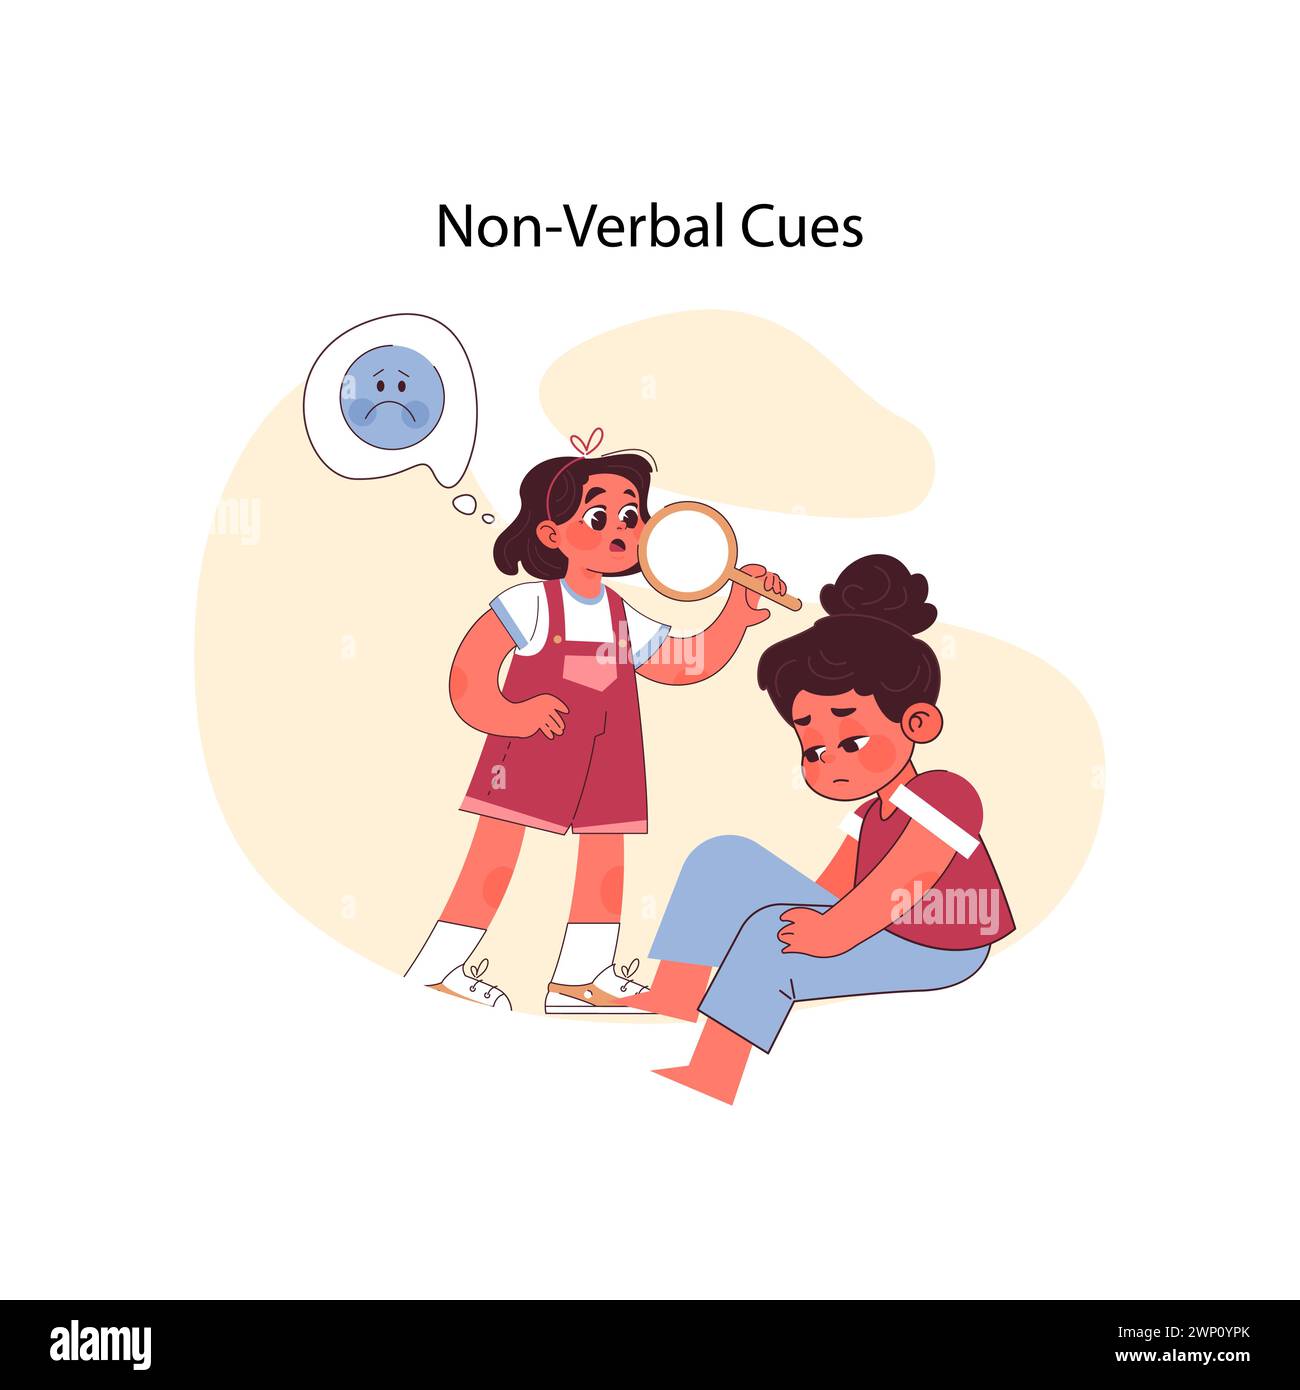 Non-verbal cues concept. Girl with magnifying glass observes distressed child, understanding emotions beyond words. Perception of body signals. Recognizing unspoken feelings. Flat vector illustration Stock Vector